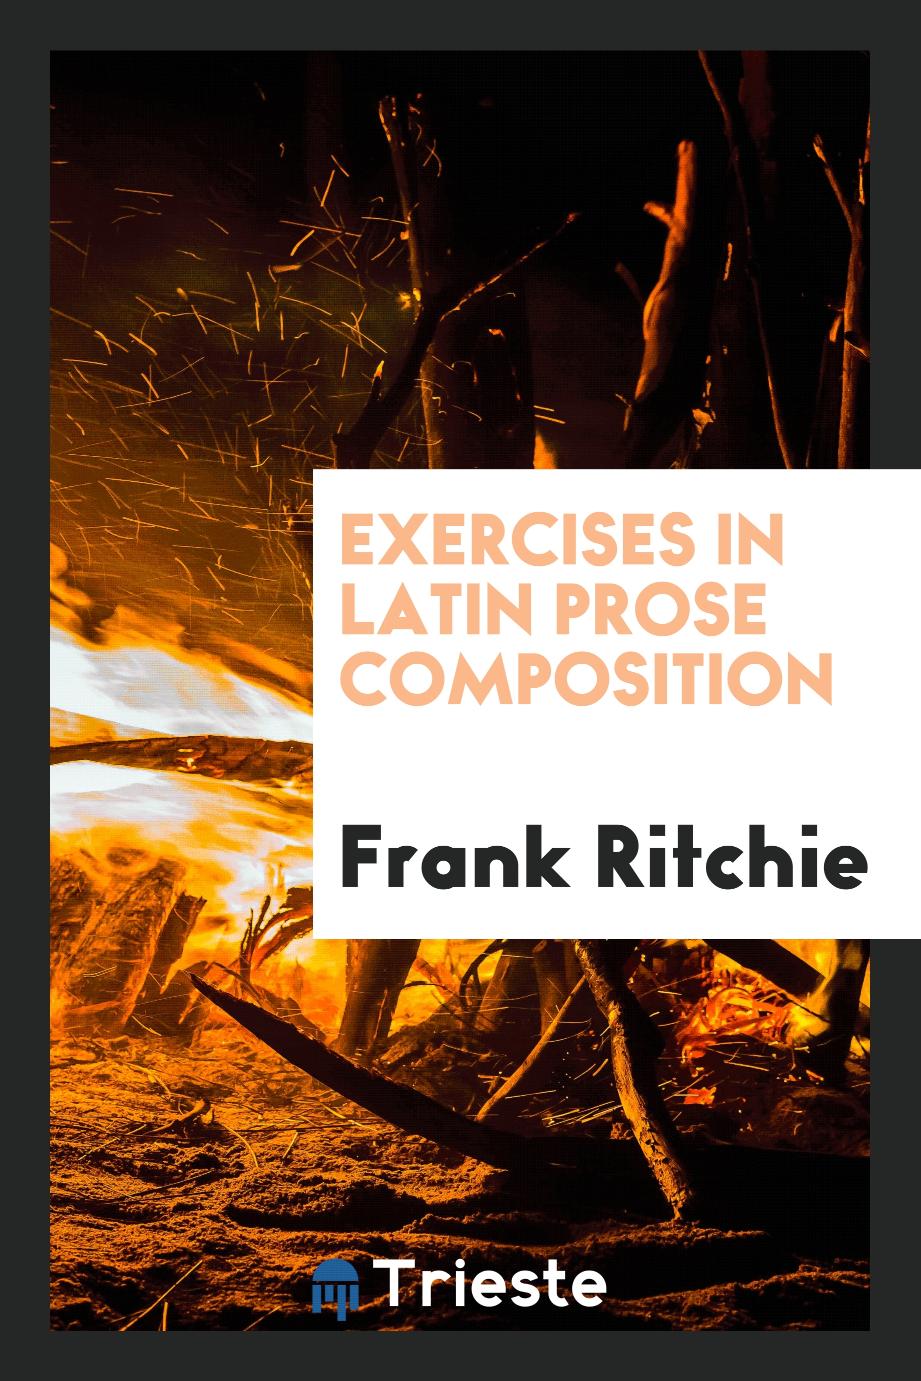 Exercises in Latin prose composition